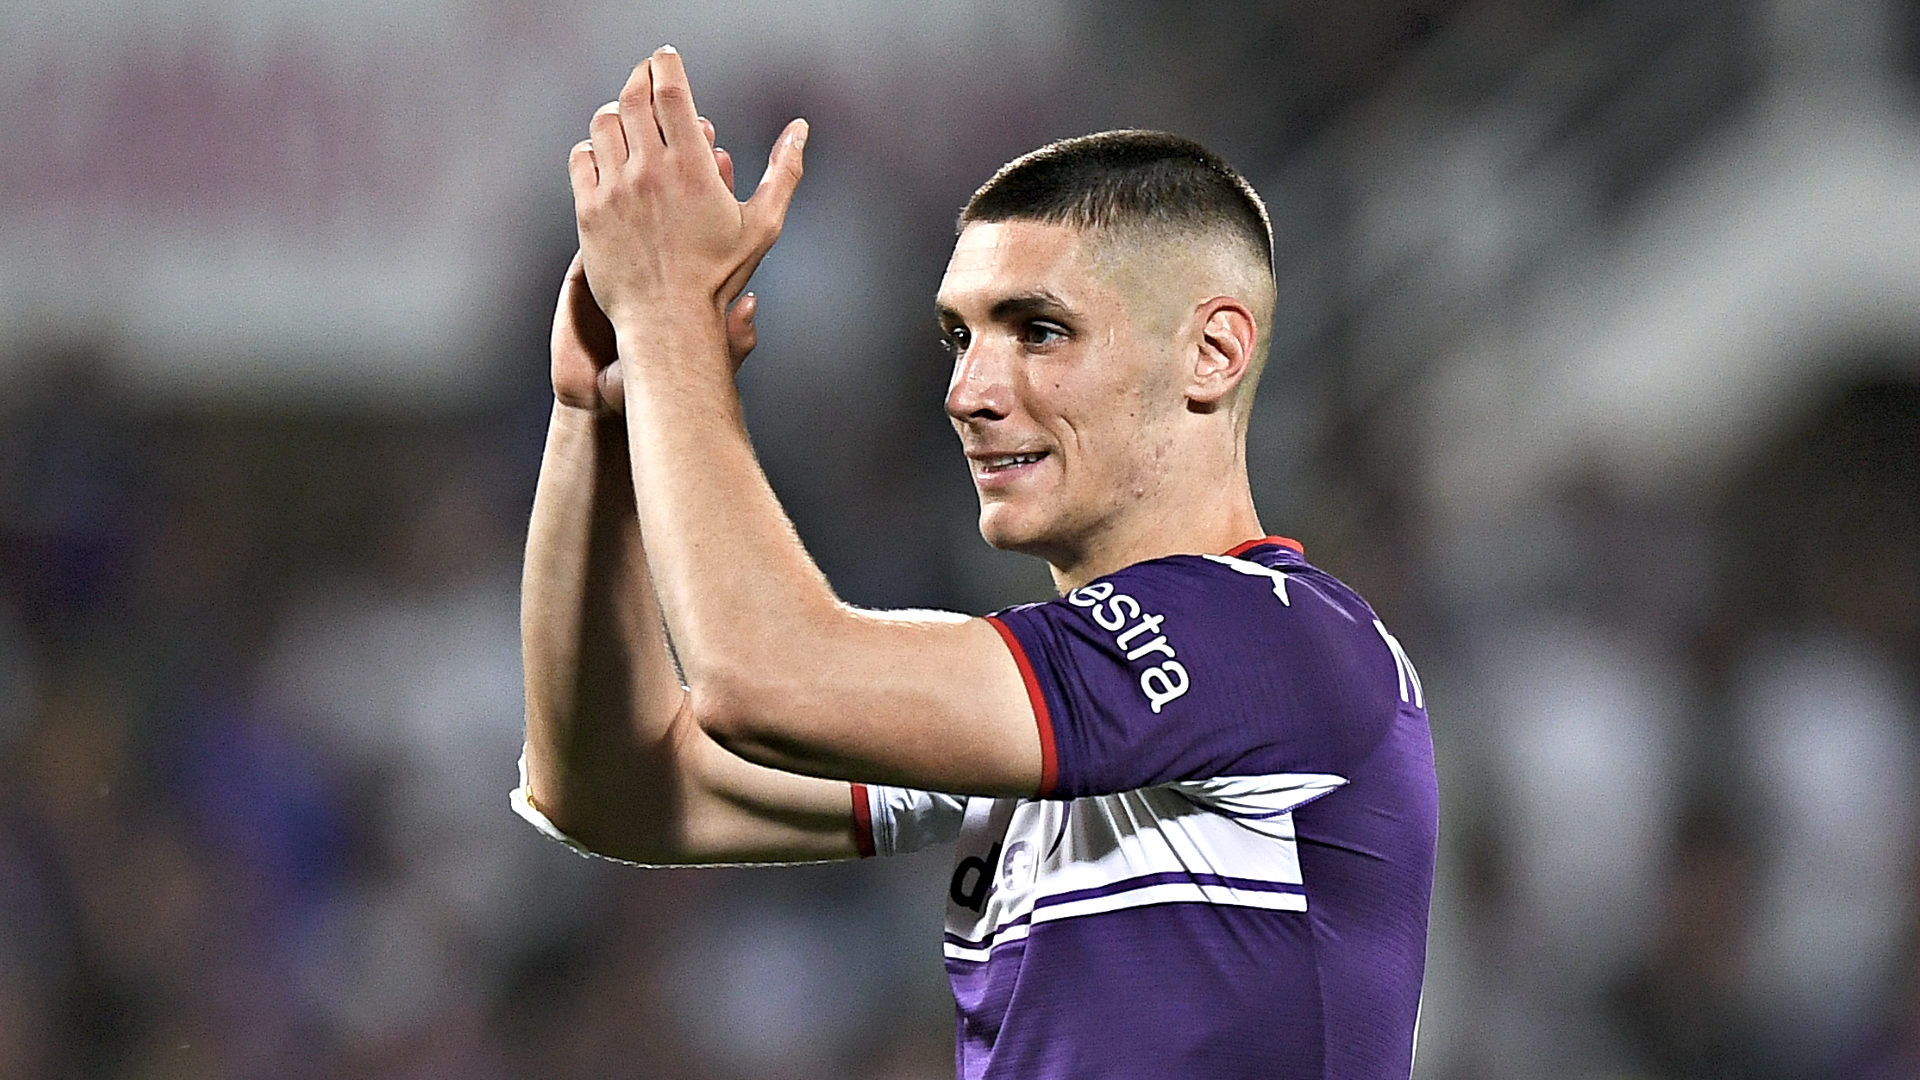 Roma are in the market for a new defender, and they are interested in Nikola Milenkovic, but his purchase is unlikely considering his price tag.